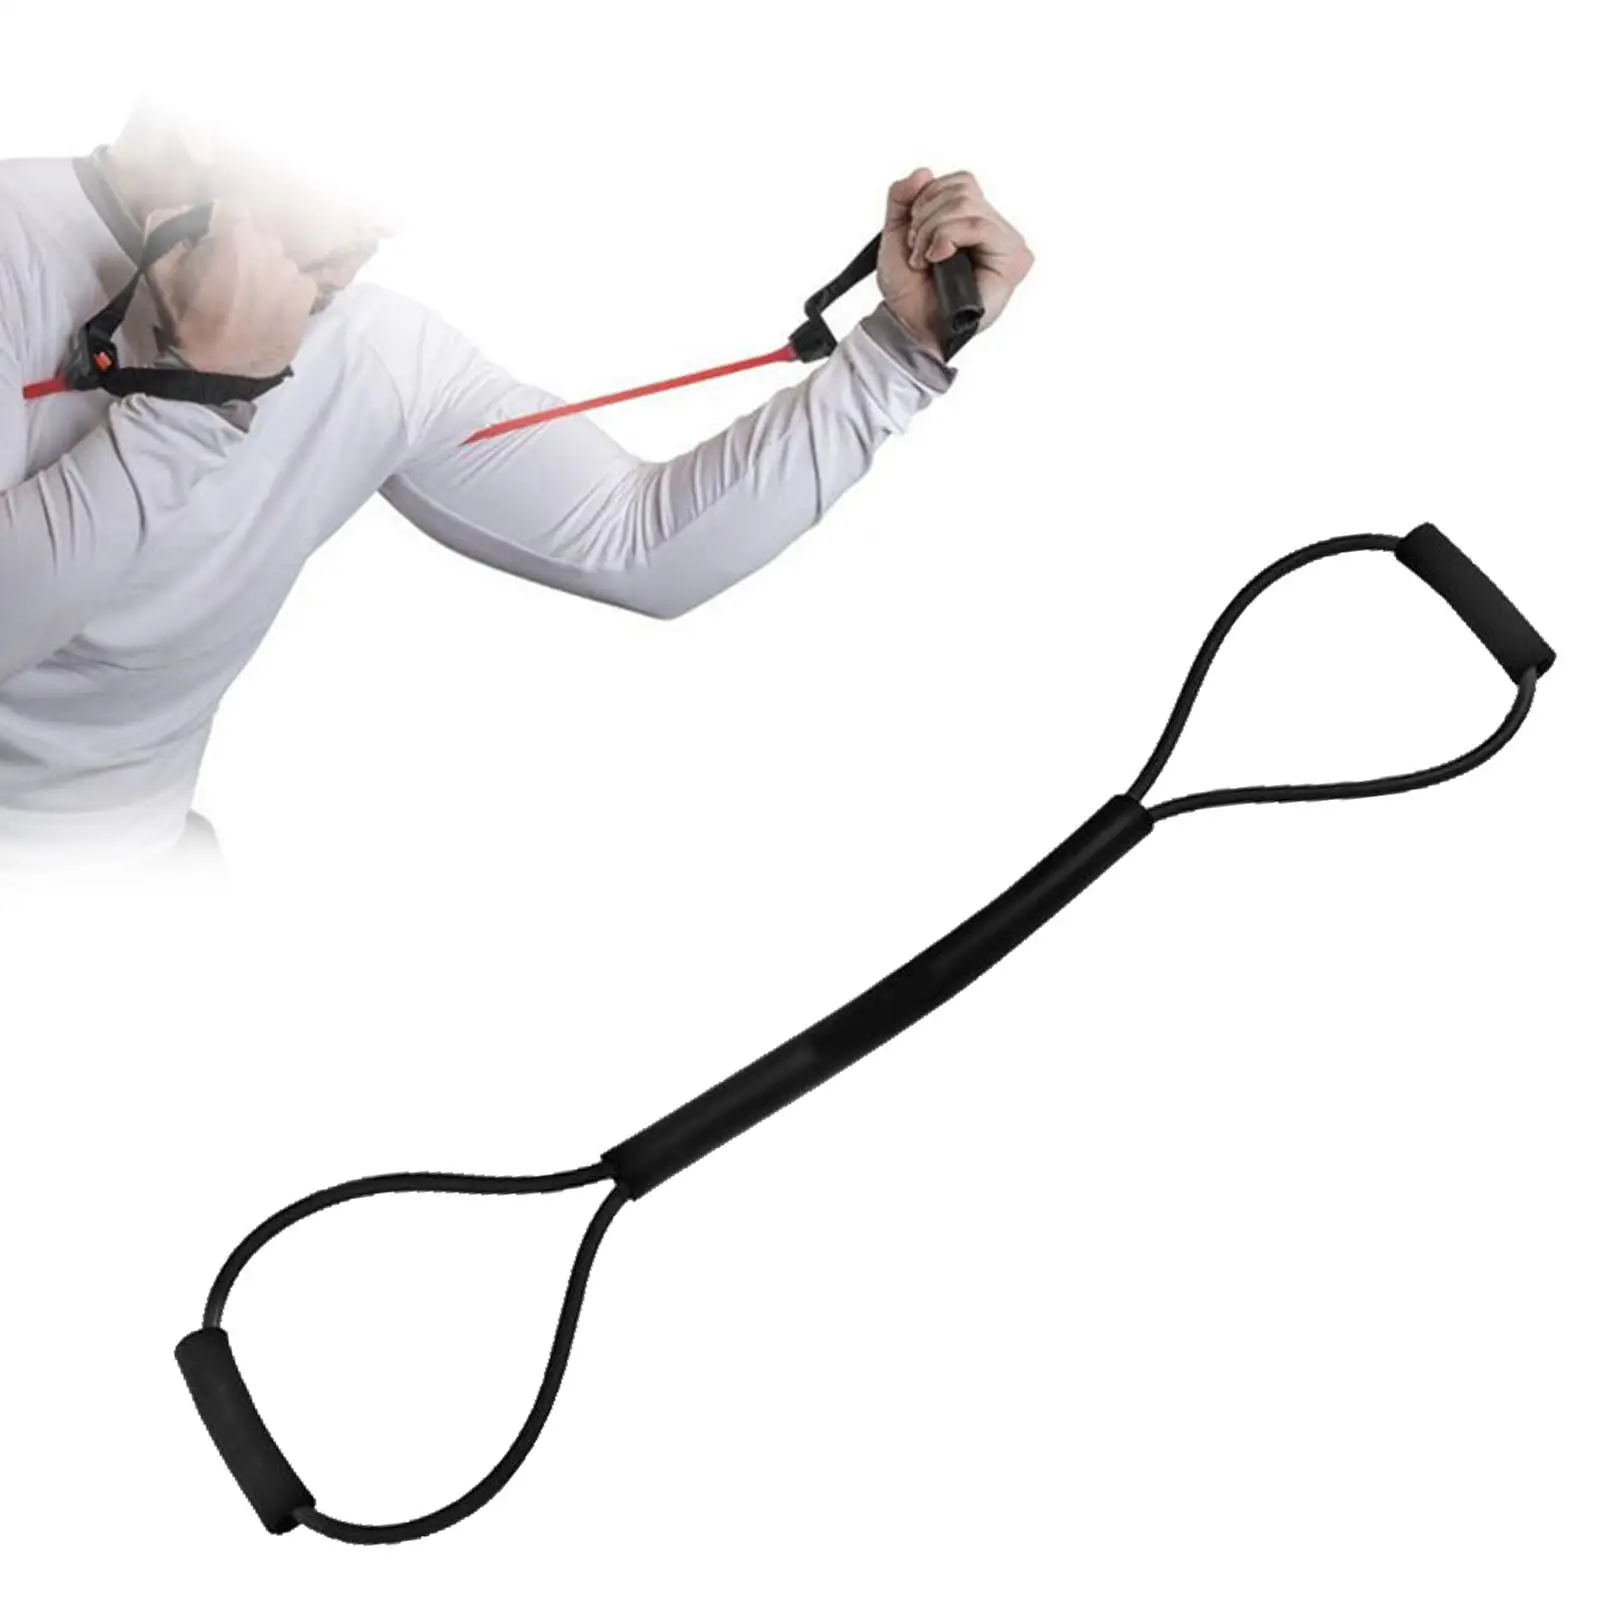 Resistance Bands Shadow Boxing Karate Arm Training  workout and fitness